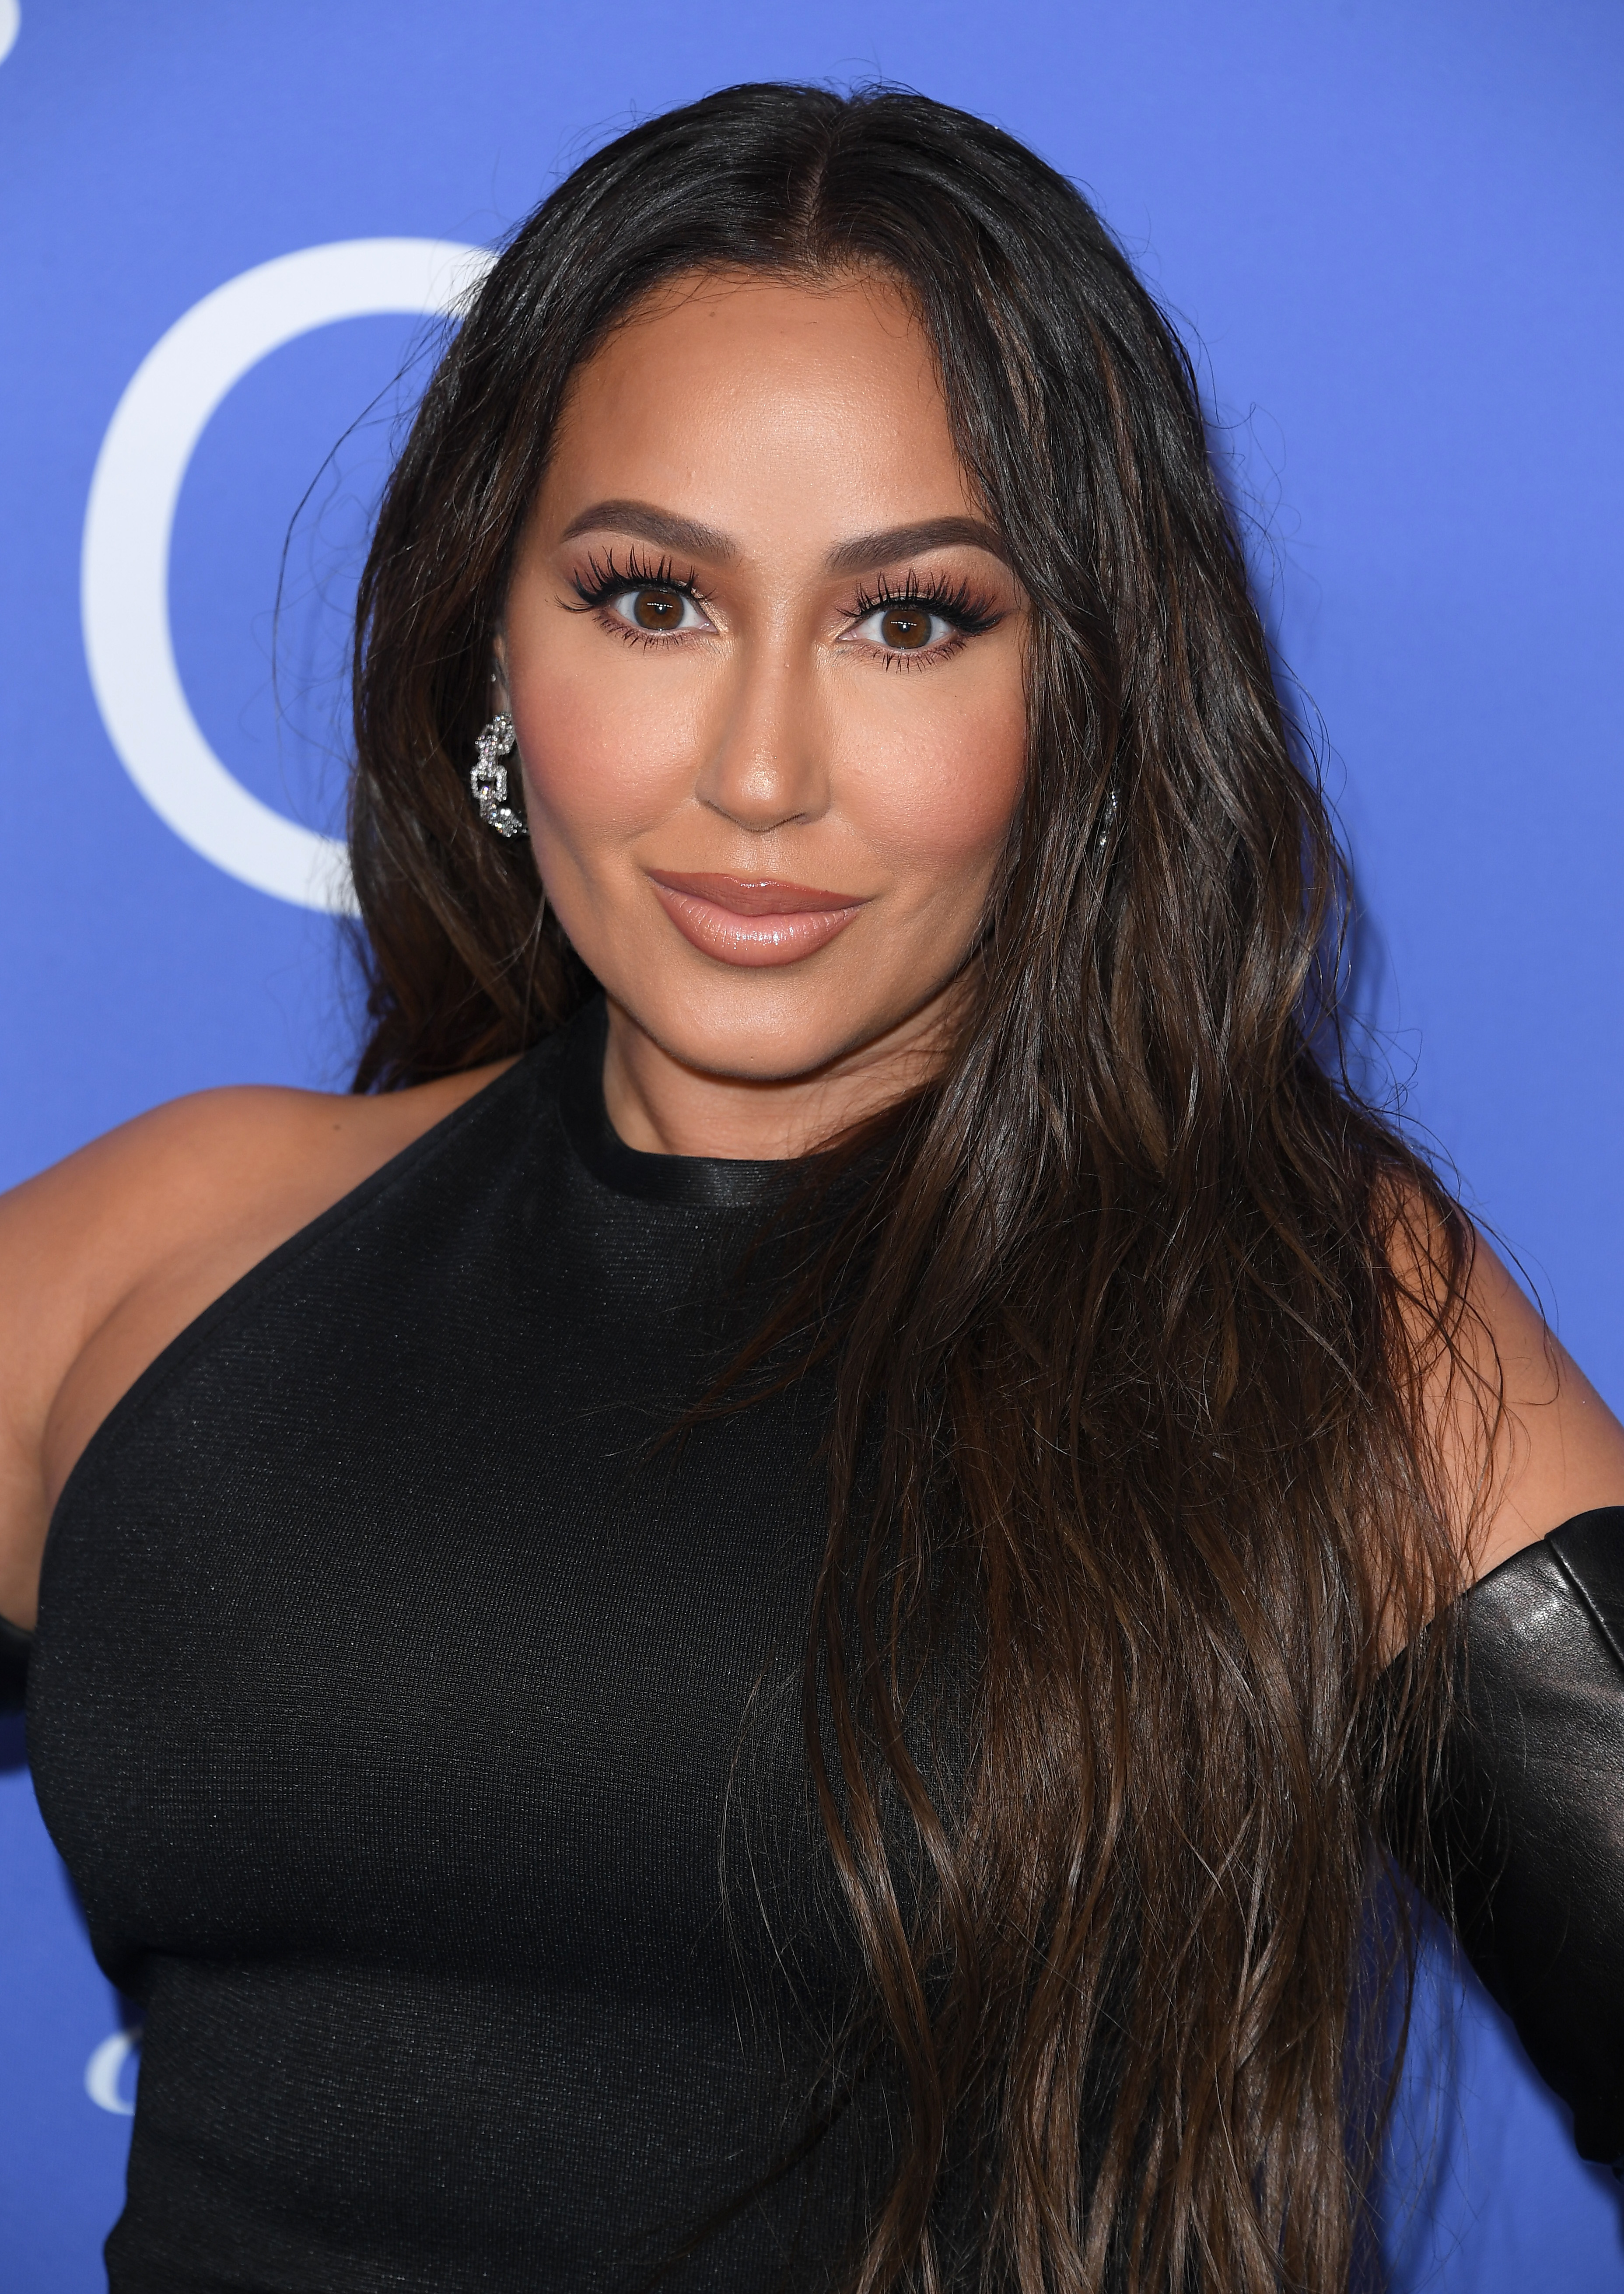 Adrienne Bailon-Houghton wearing a black one-shoulder top, posing for the camera